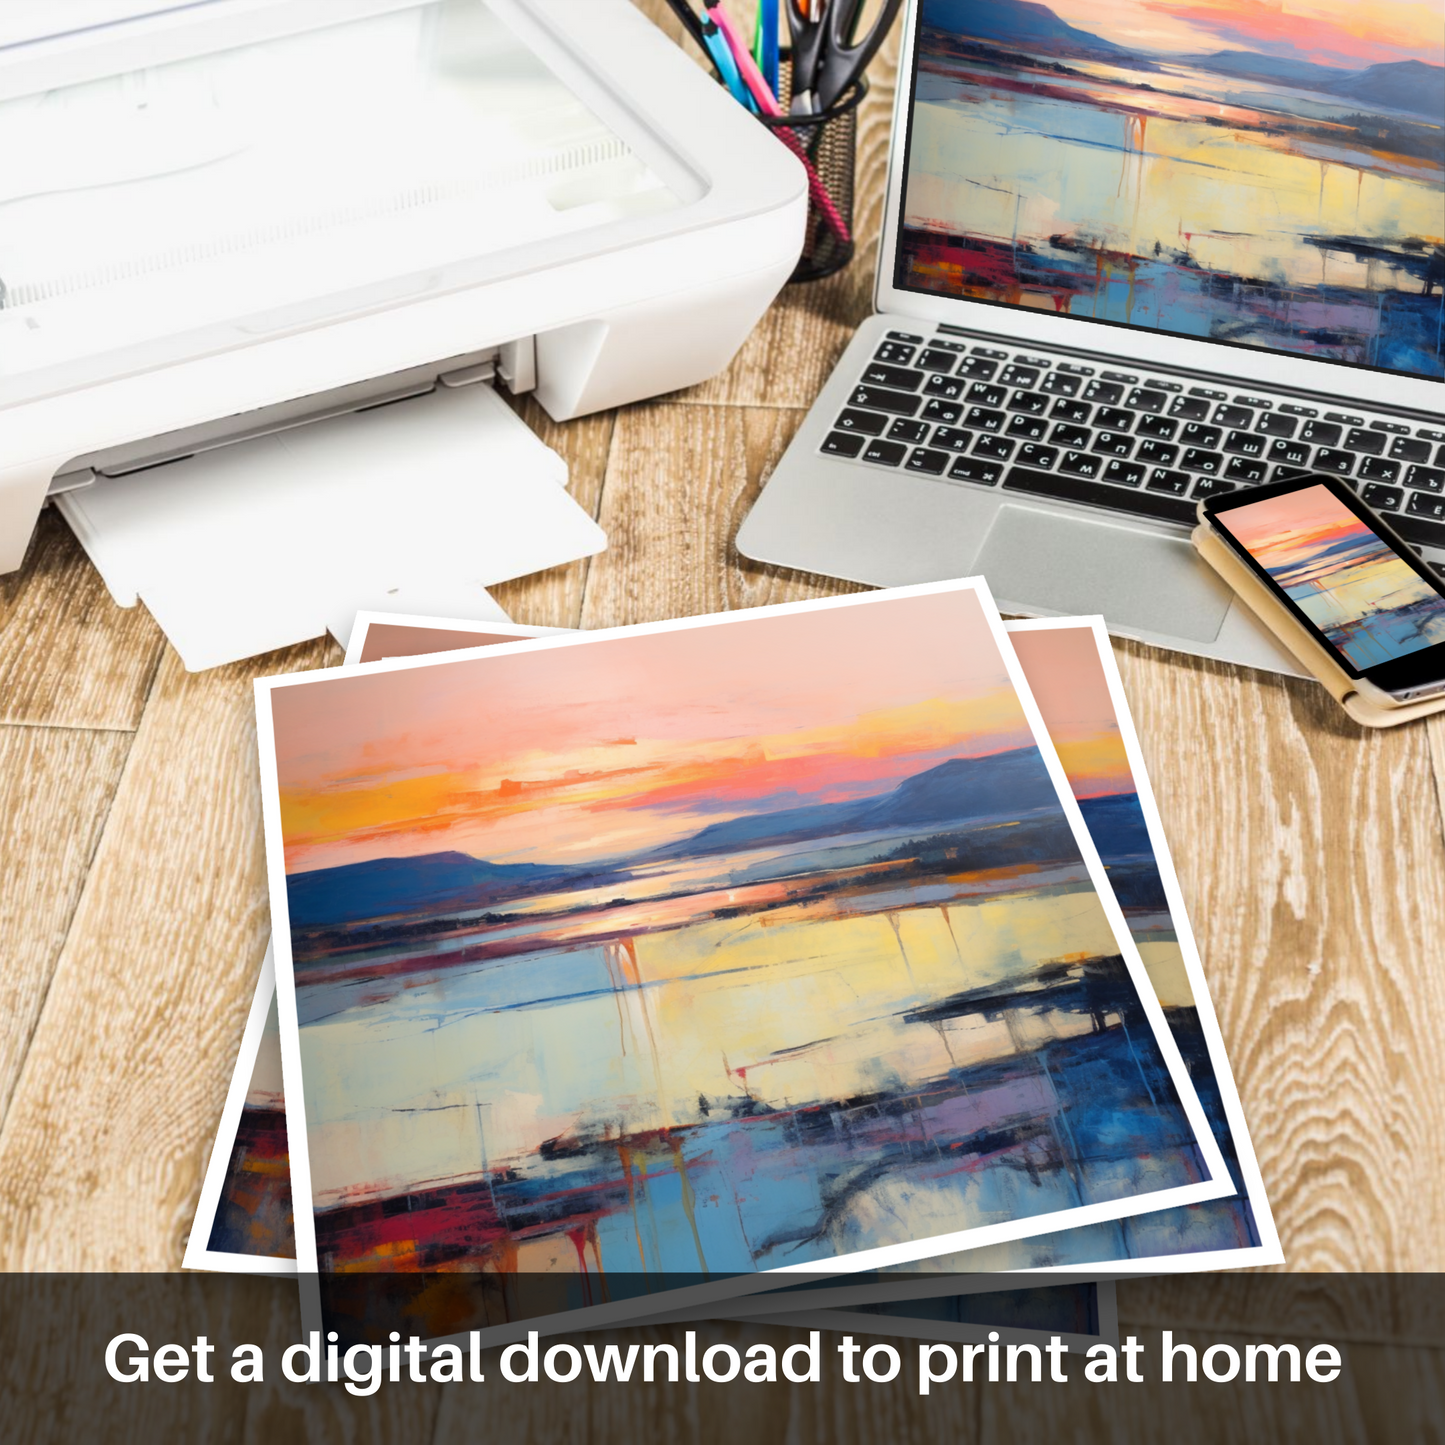 Downloadable and printable picture of Sunset over Loch Lomond